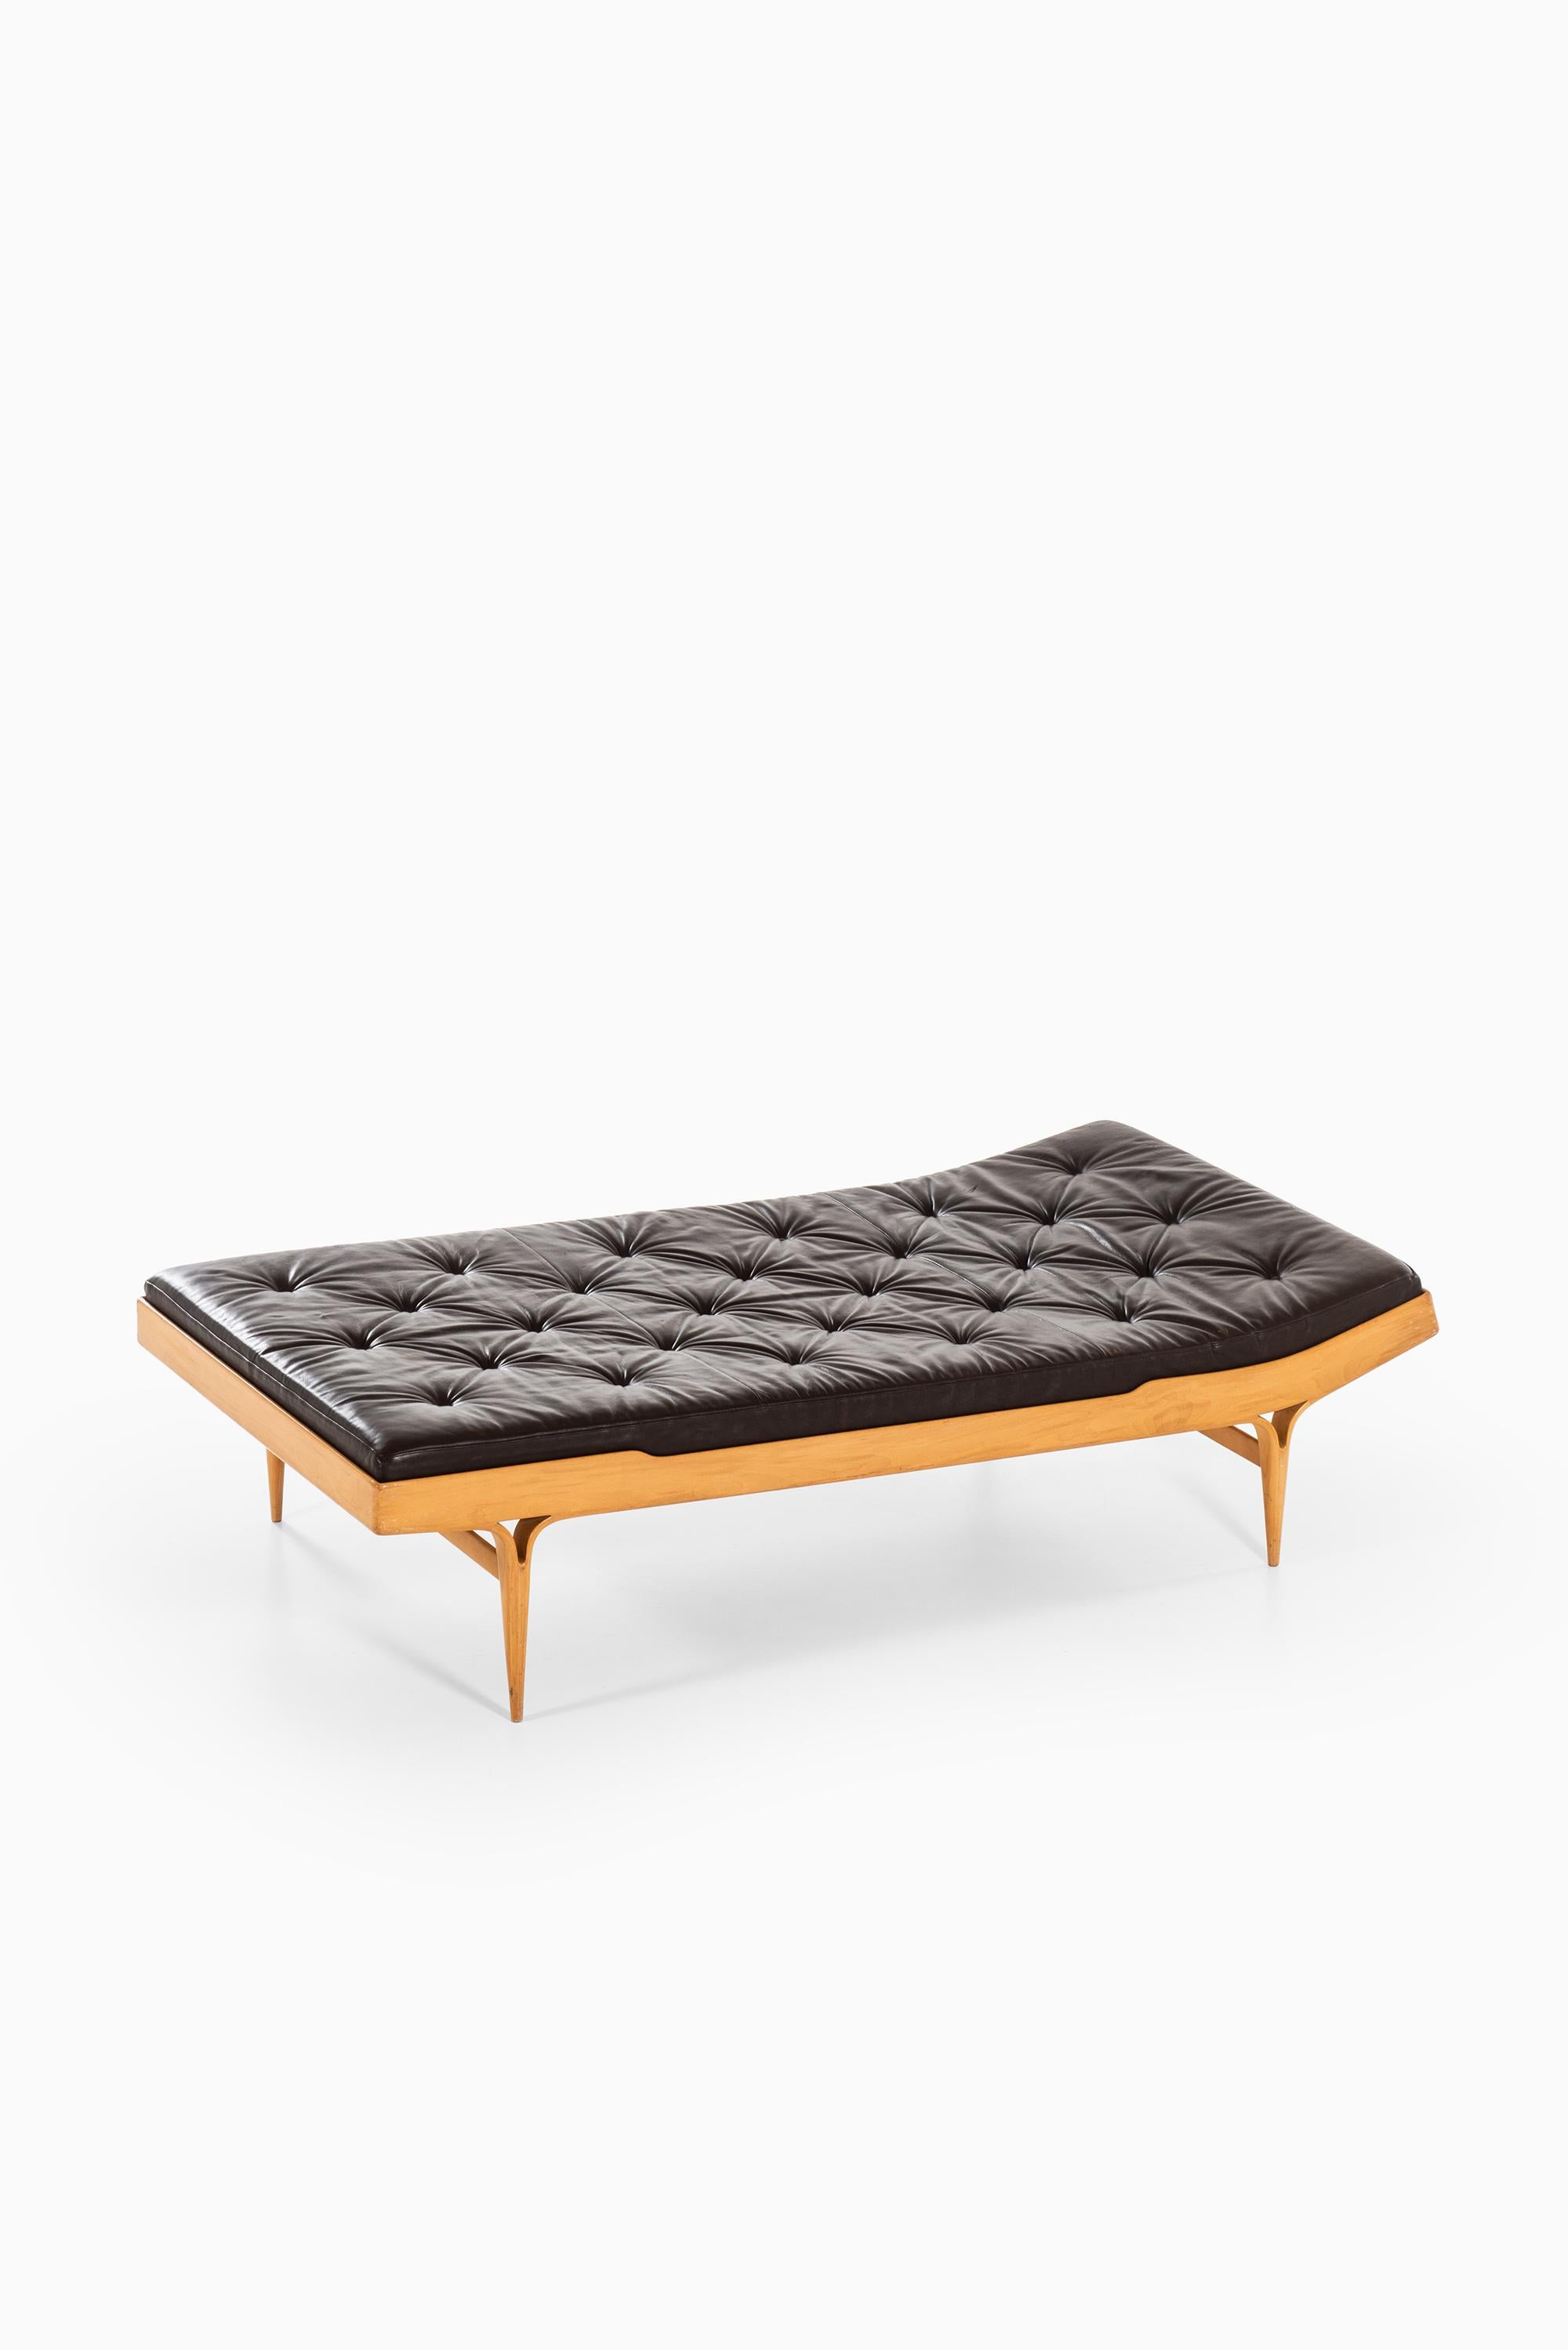 Swedish Bruno Mathsson Daybed Model Berlin Produced by Karl Mathsson in Sweden For Sale